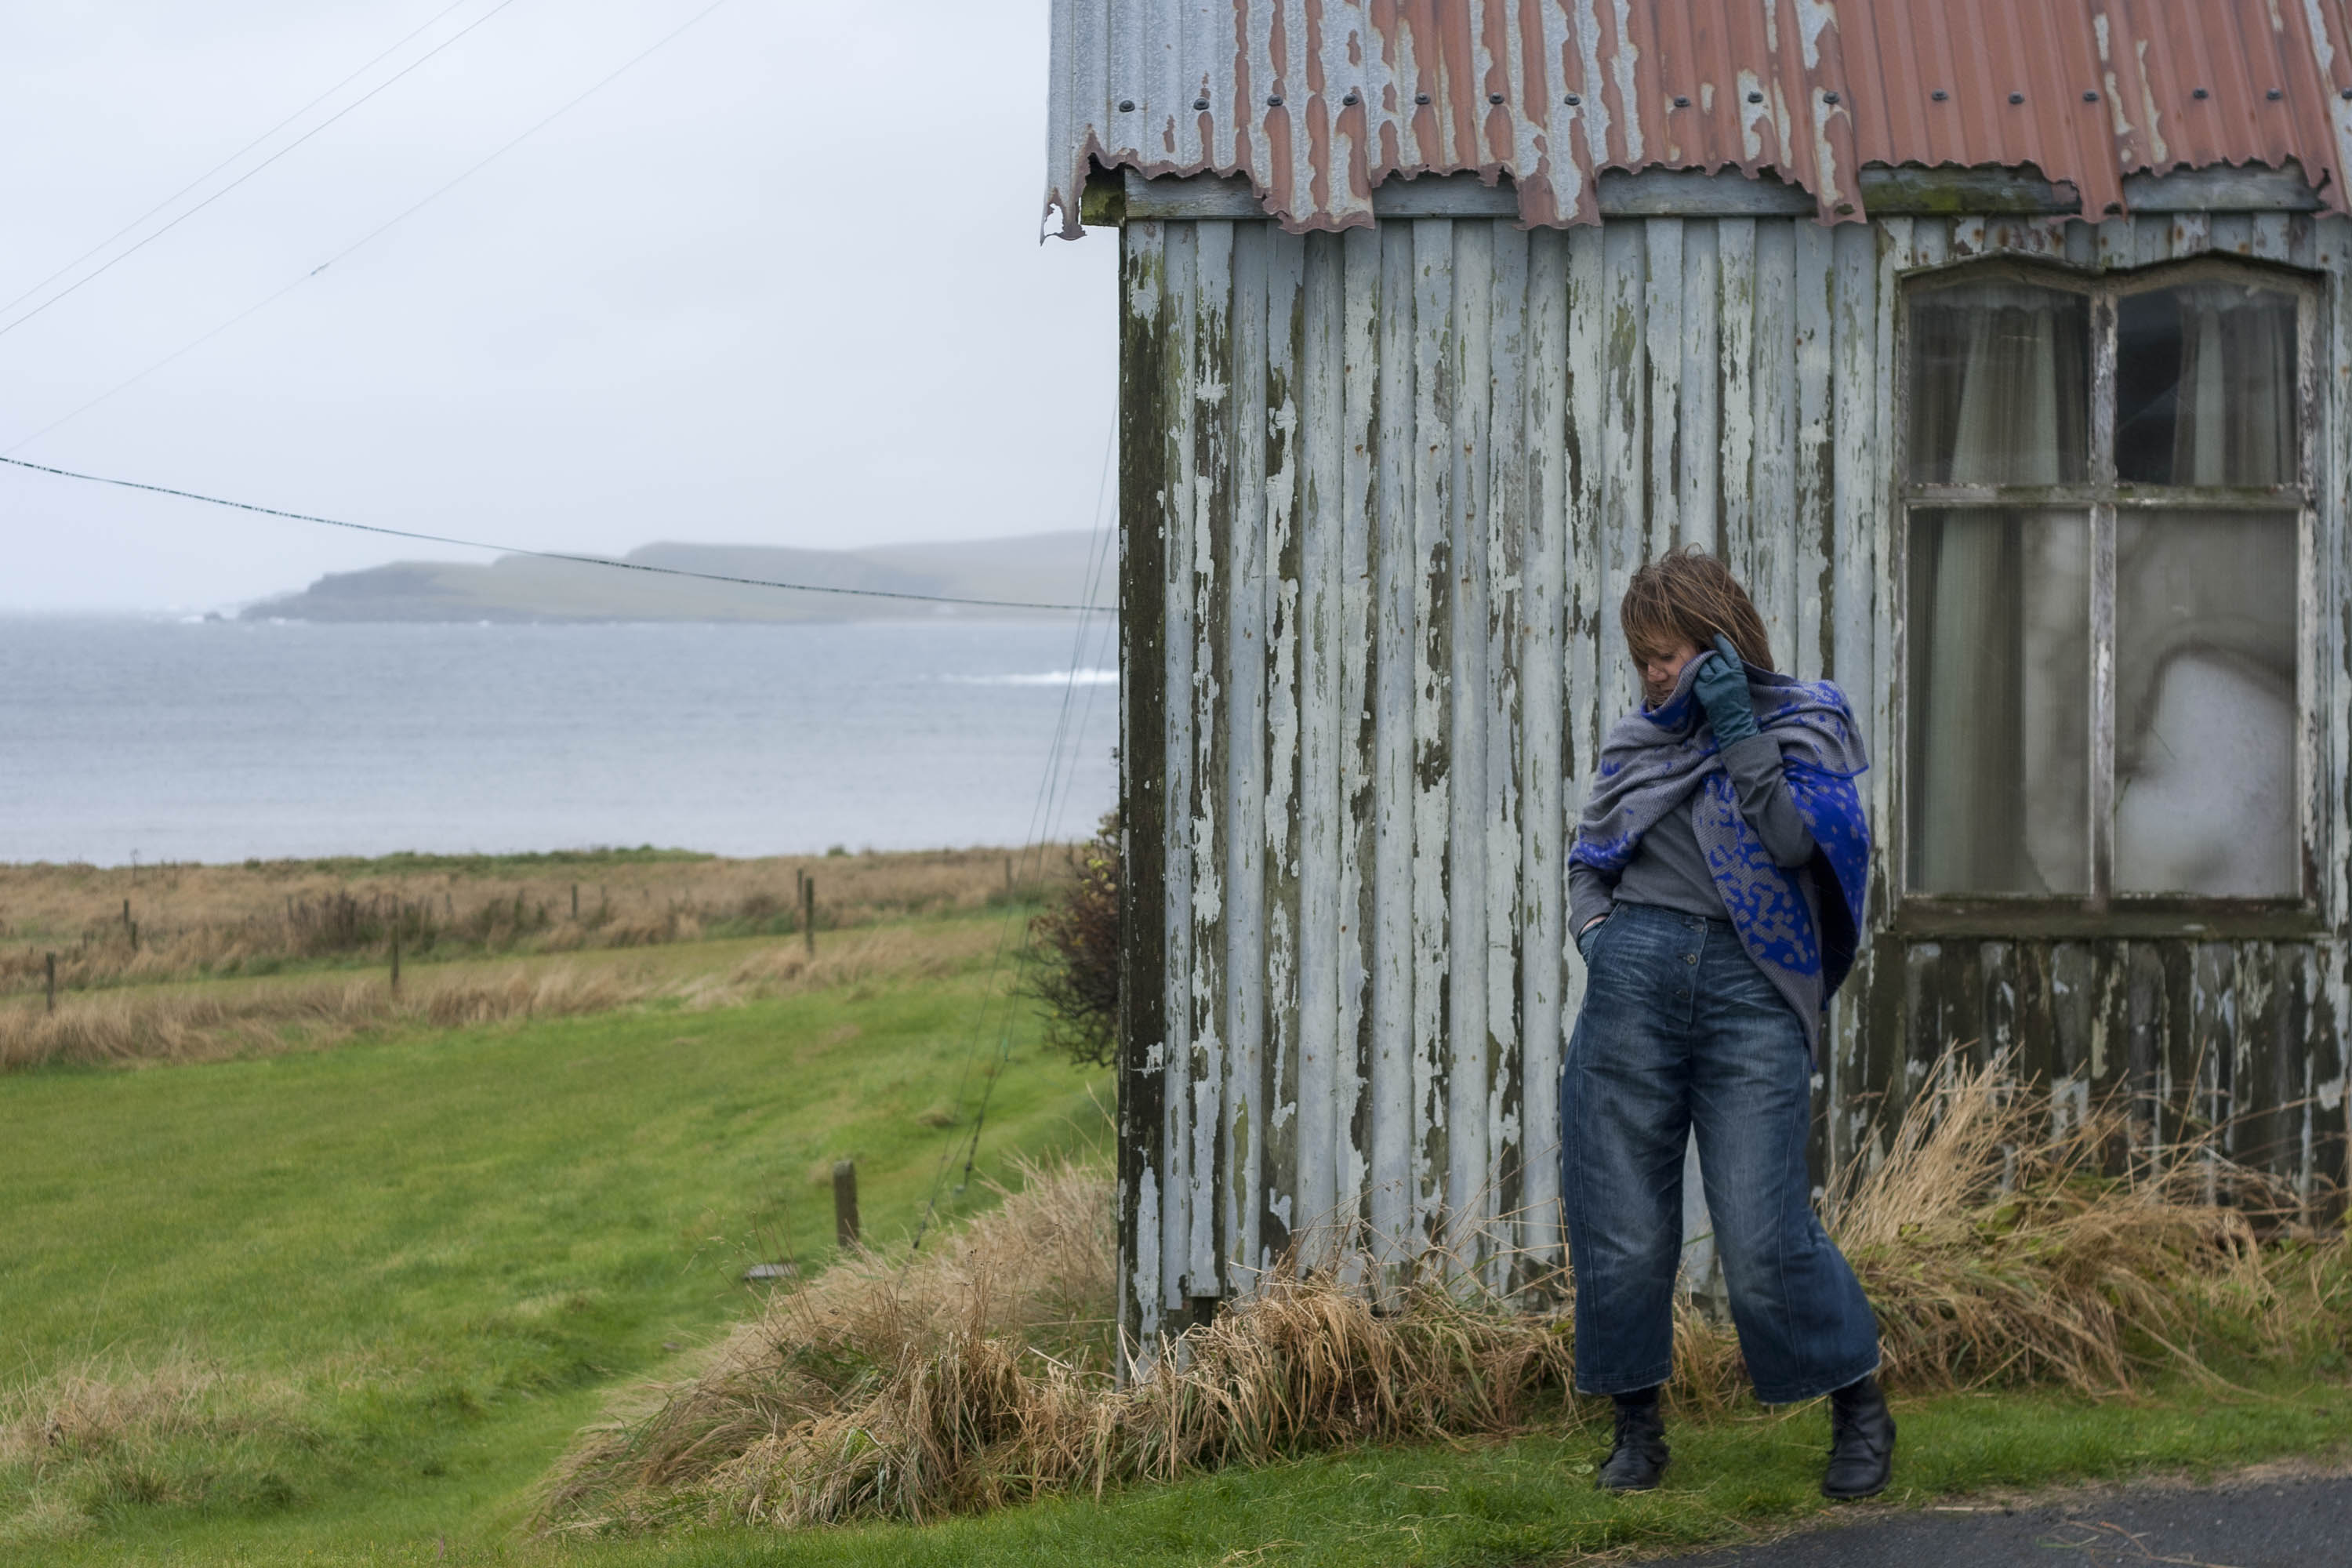 At the Gospel Hall, Hoswick, Shetland - a small, old wooden building with a rusted tin roof. In front of the building a woman stands with a grey and electric blue wrap and indigo loose jeans